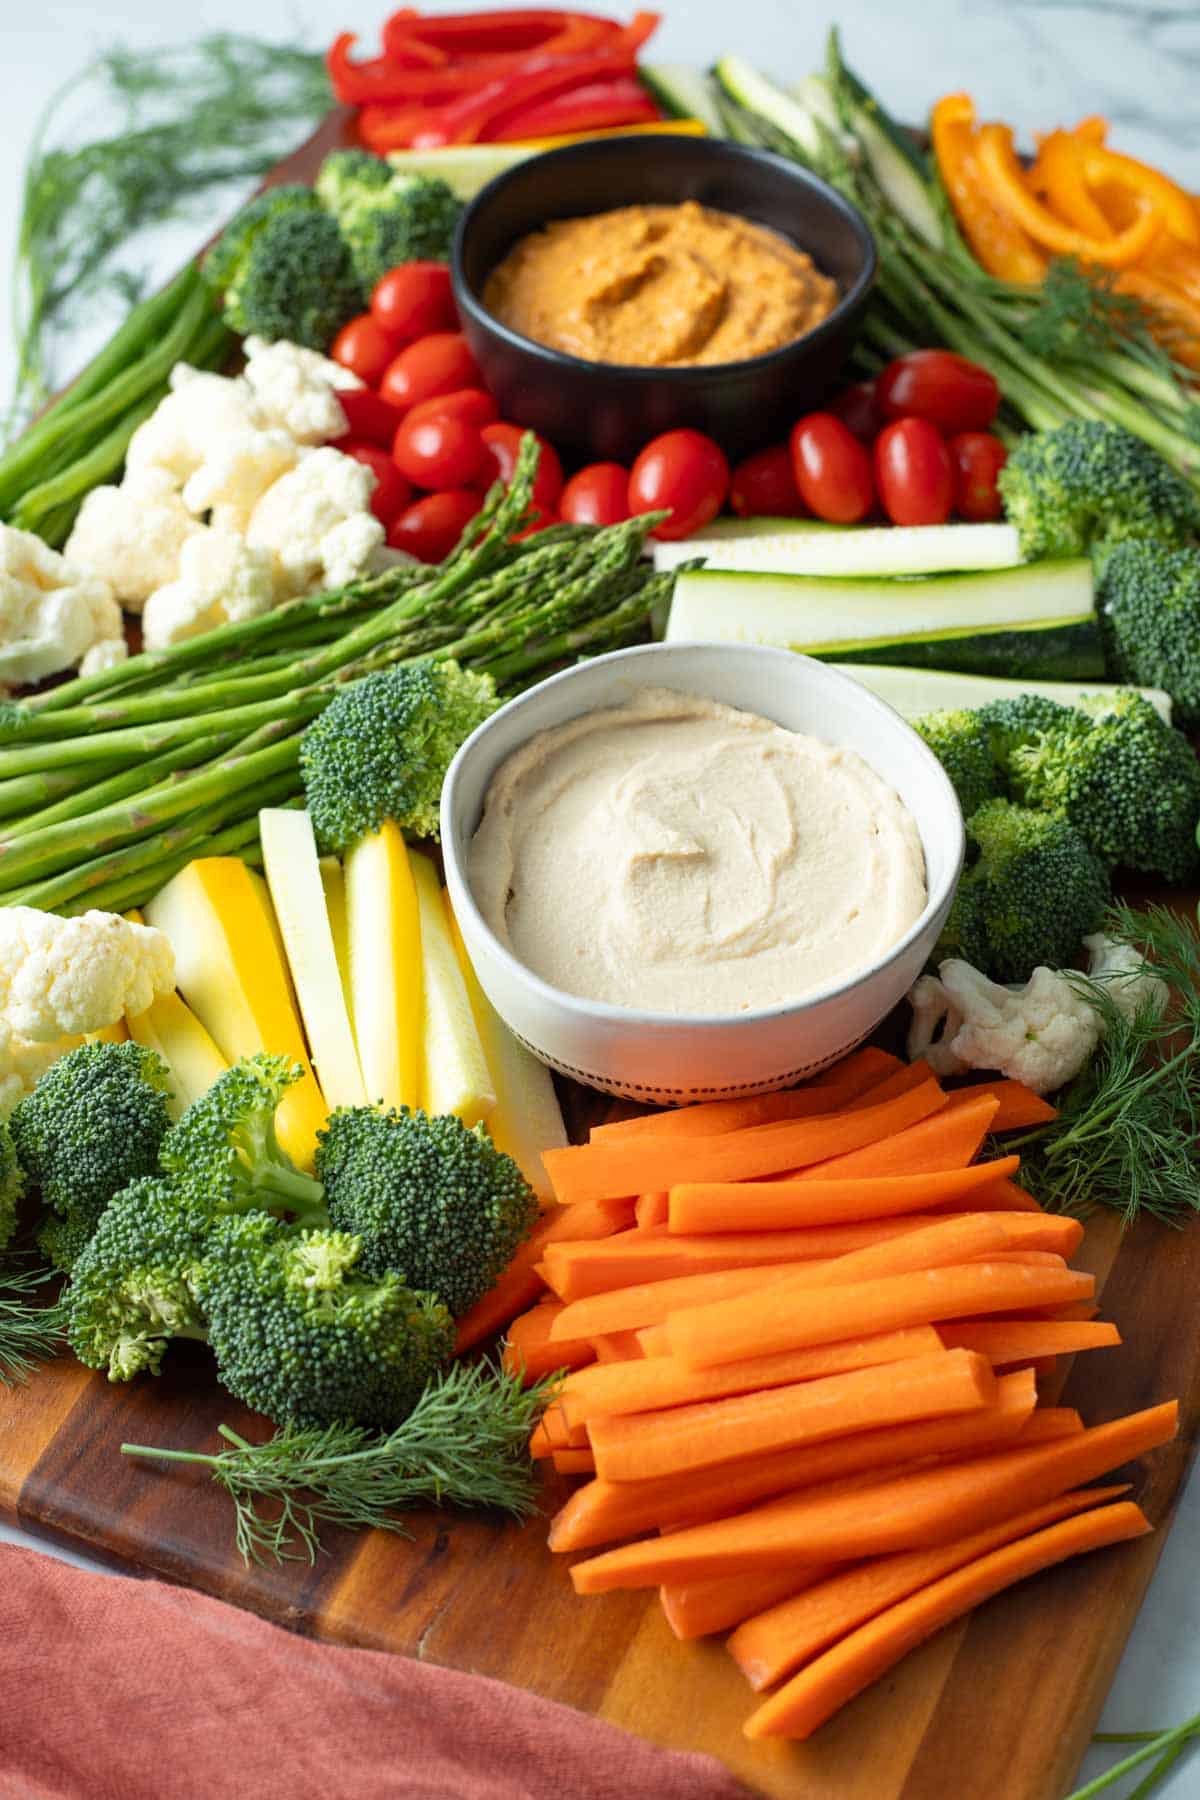 Vegetable tray with hummus and chipotle dip.
